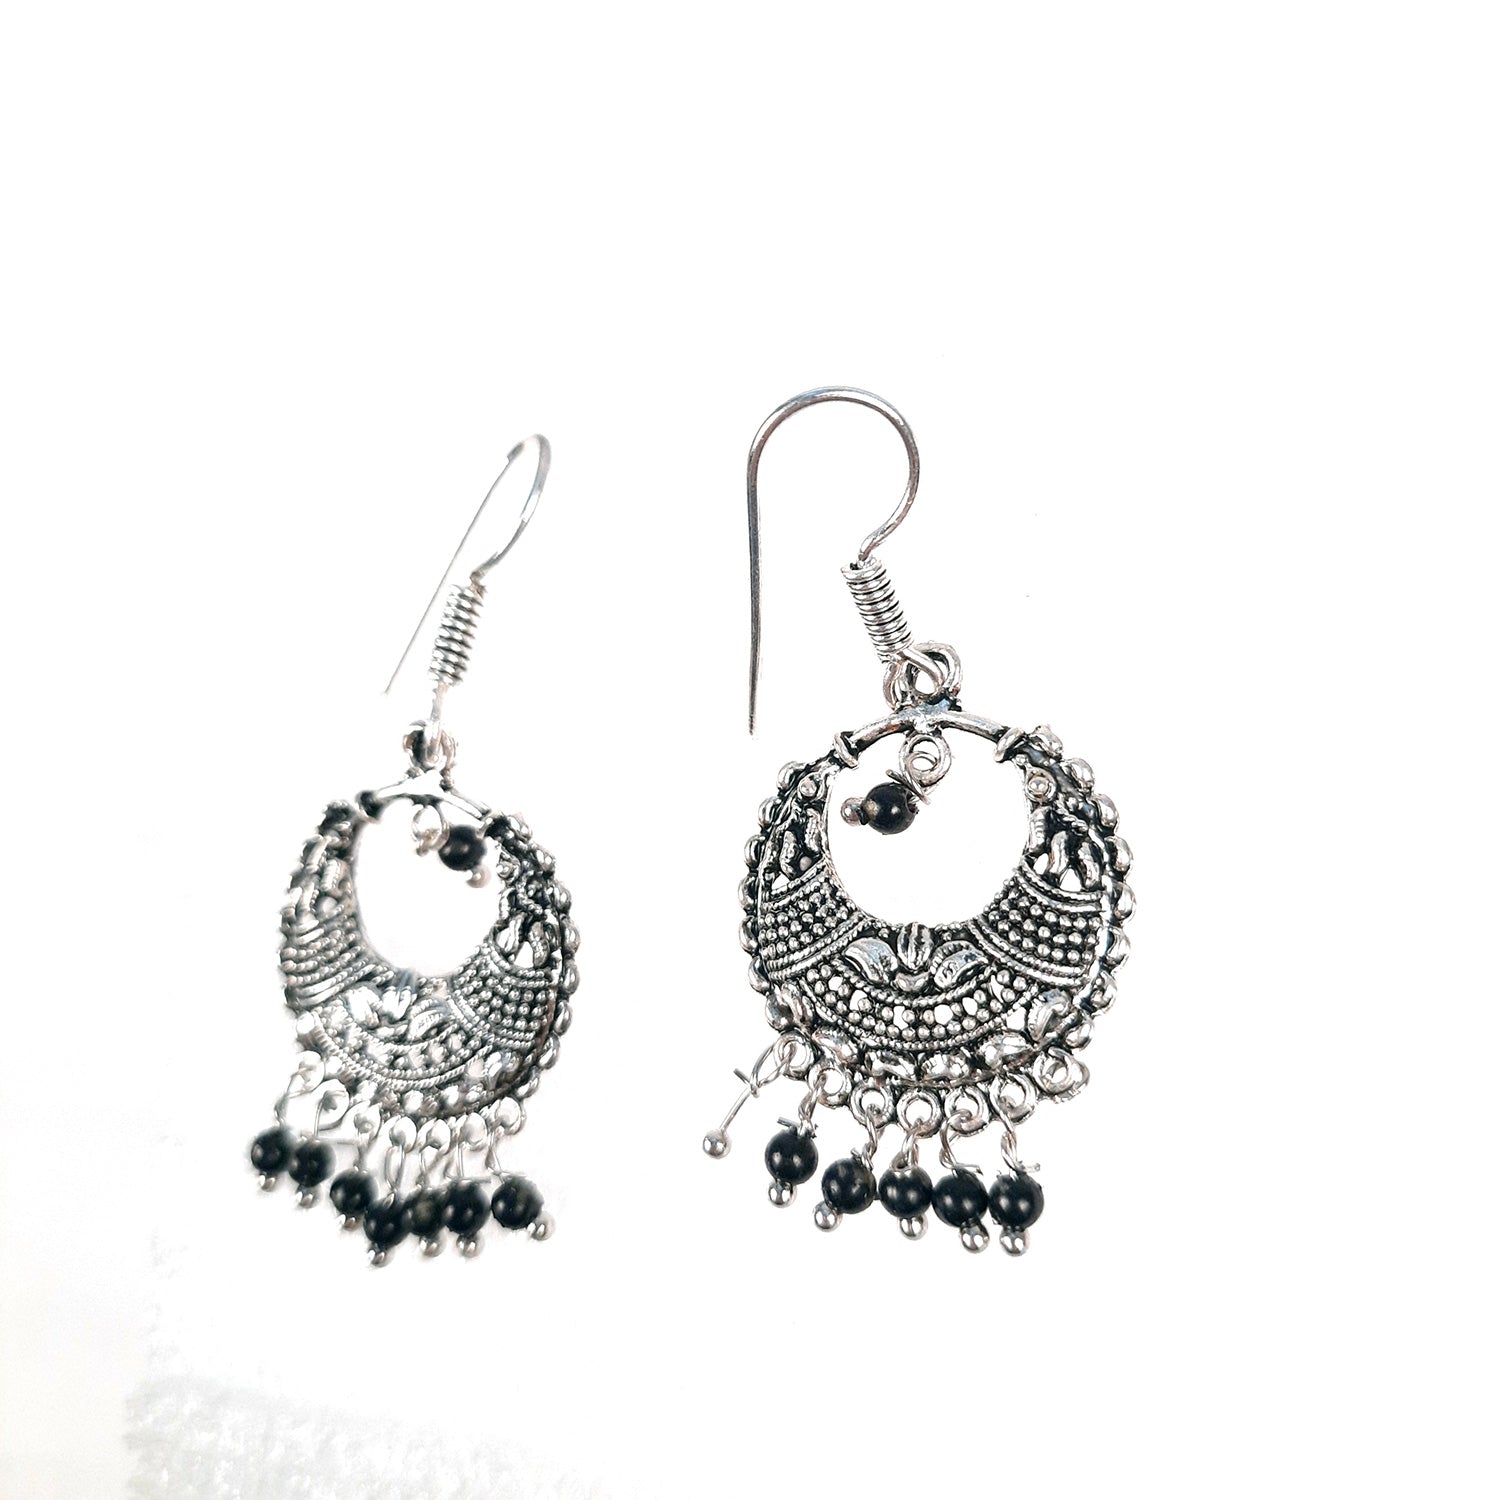 Jhumka Earrings for Women & Girls - Black Bead | Silver Oxidised Earrings | Latest Stylish Fashion Jewellery | Gifts for Her, Friendship Day, Valentine's Day Gift - Apkamart